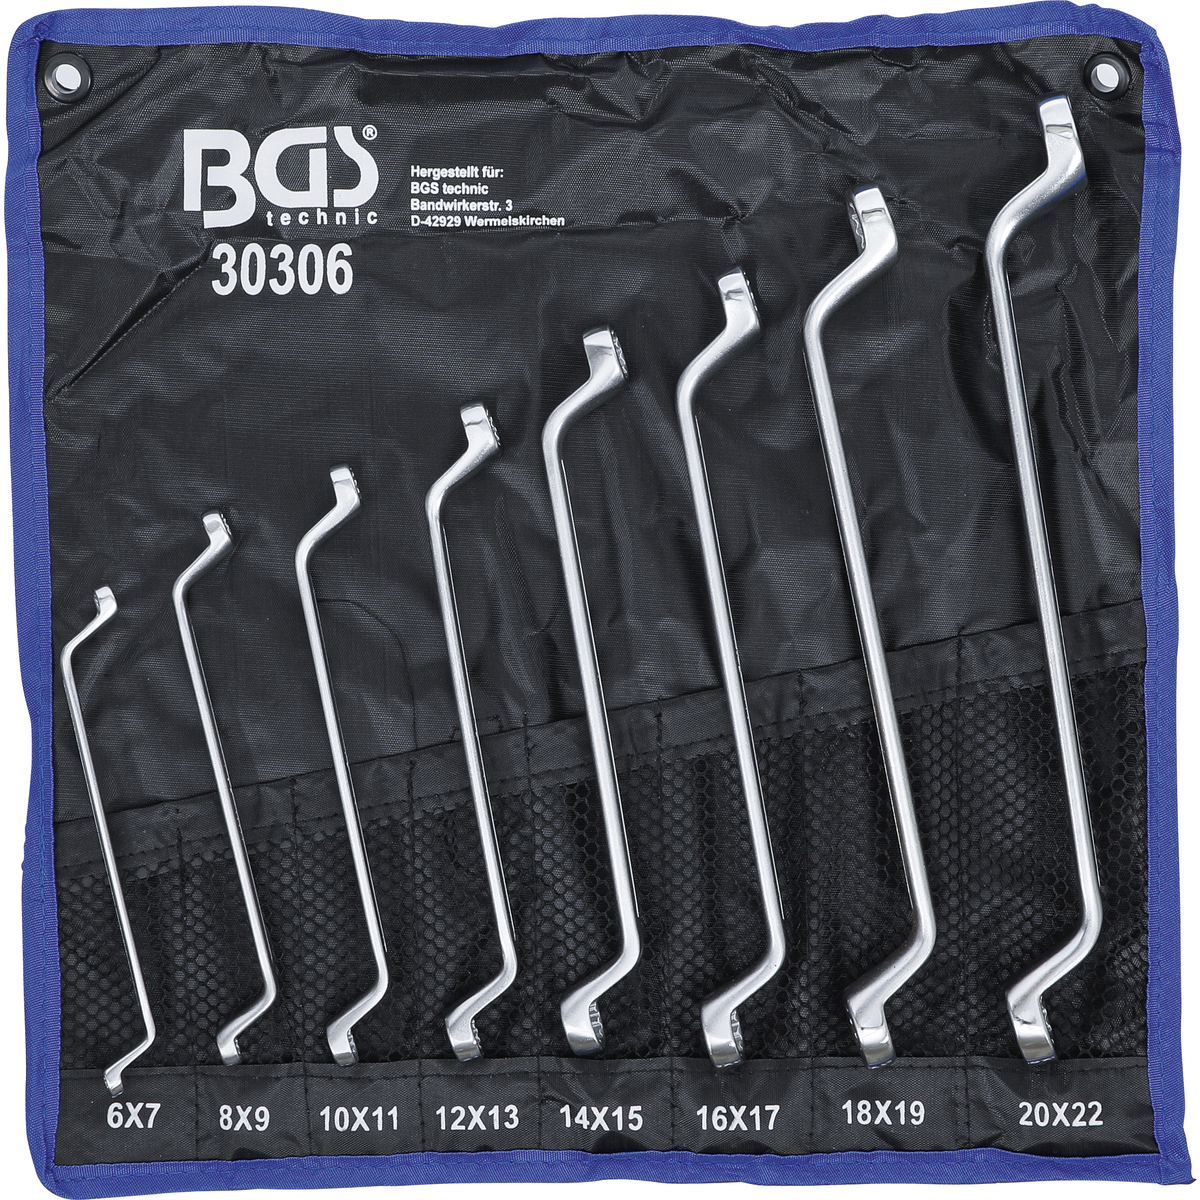 BGS 1186-10x11 extra long Double Ring Spanner 10 x 11 mm